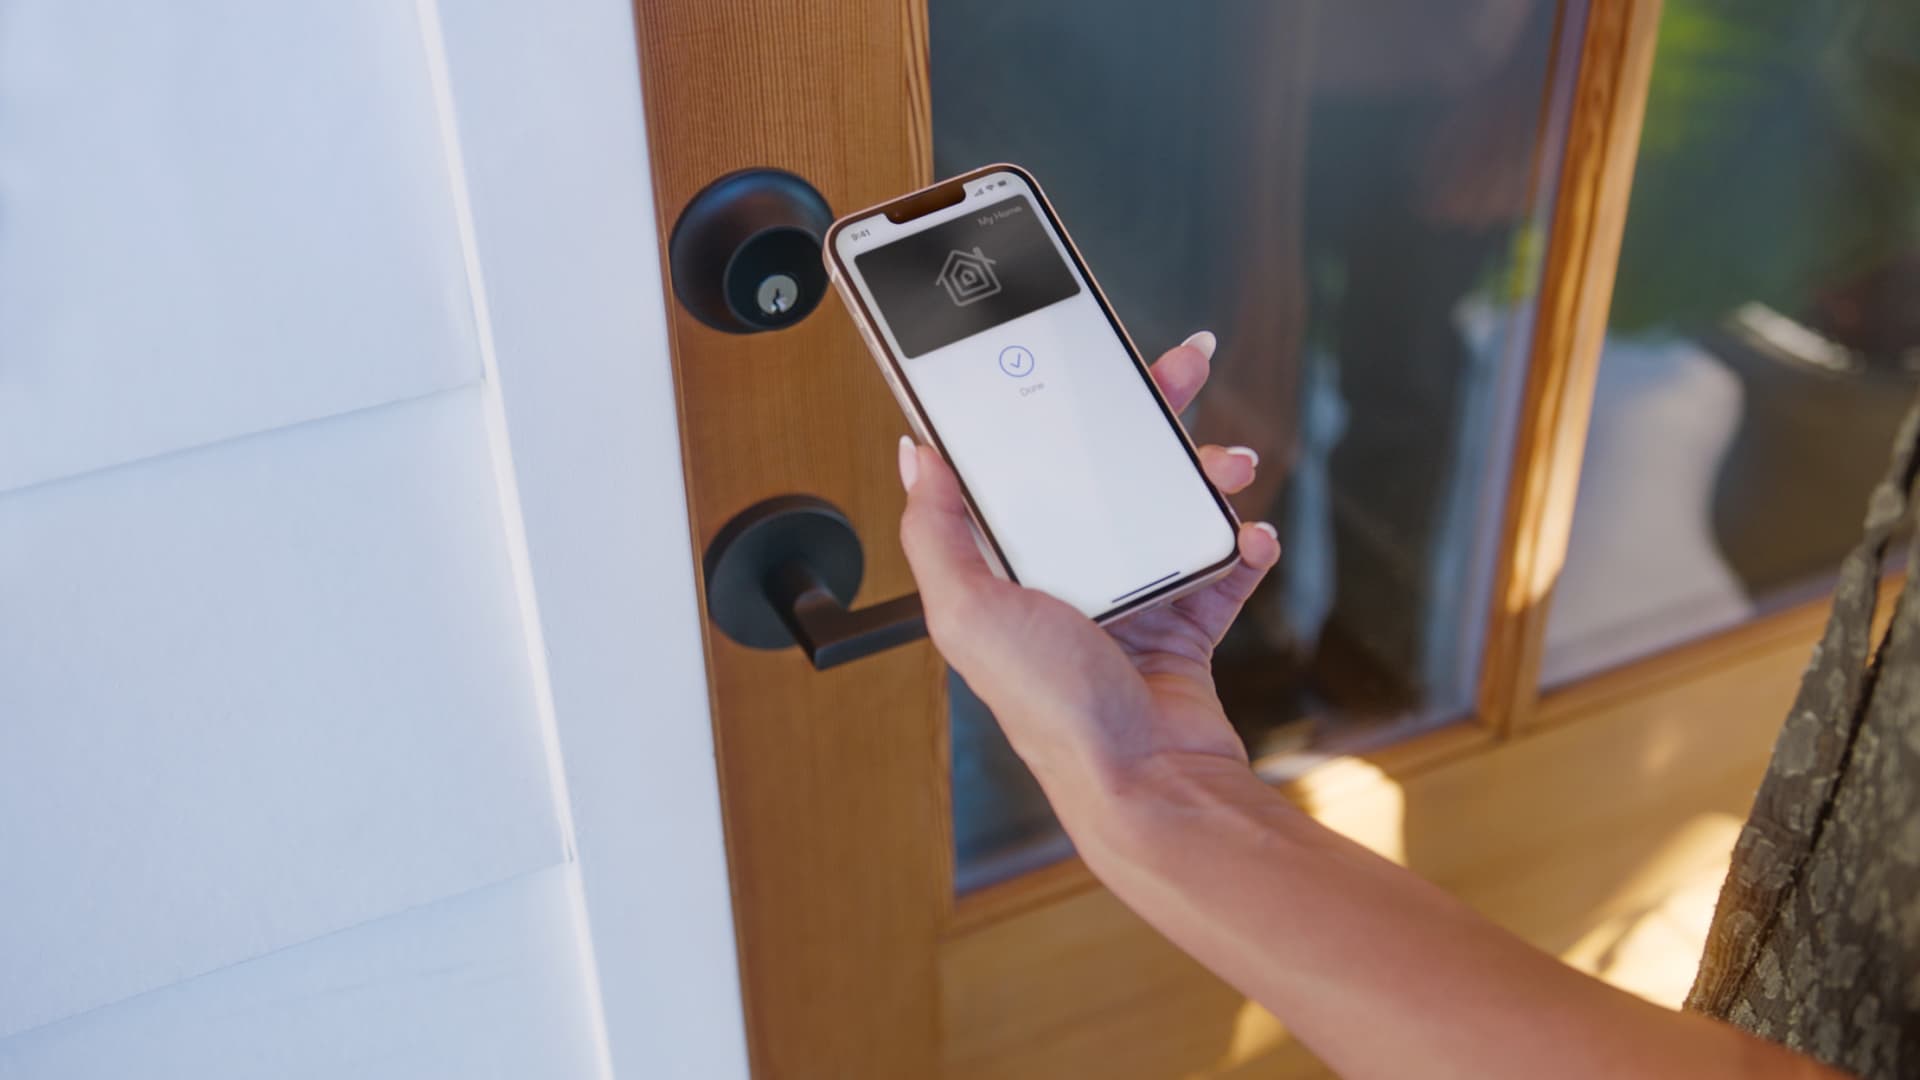 Apple starts selling front door lock that can be unlocked by tapping an iPhone or Apple Watch – CNBC